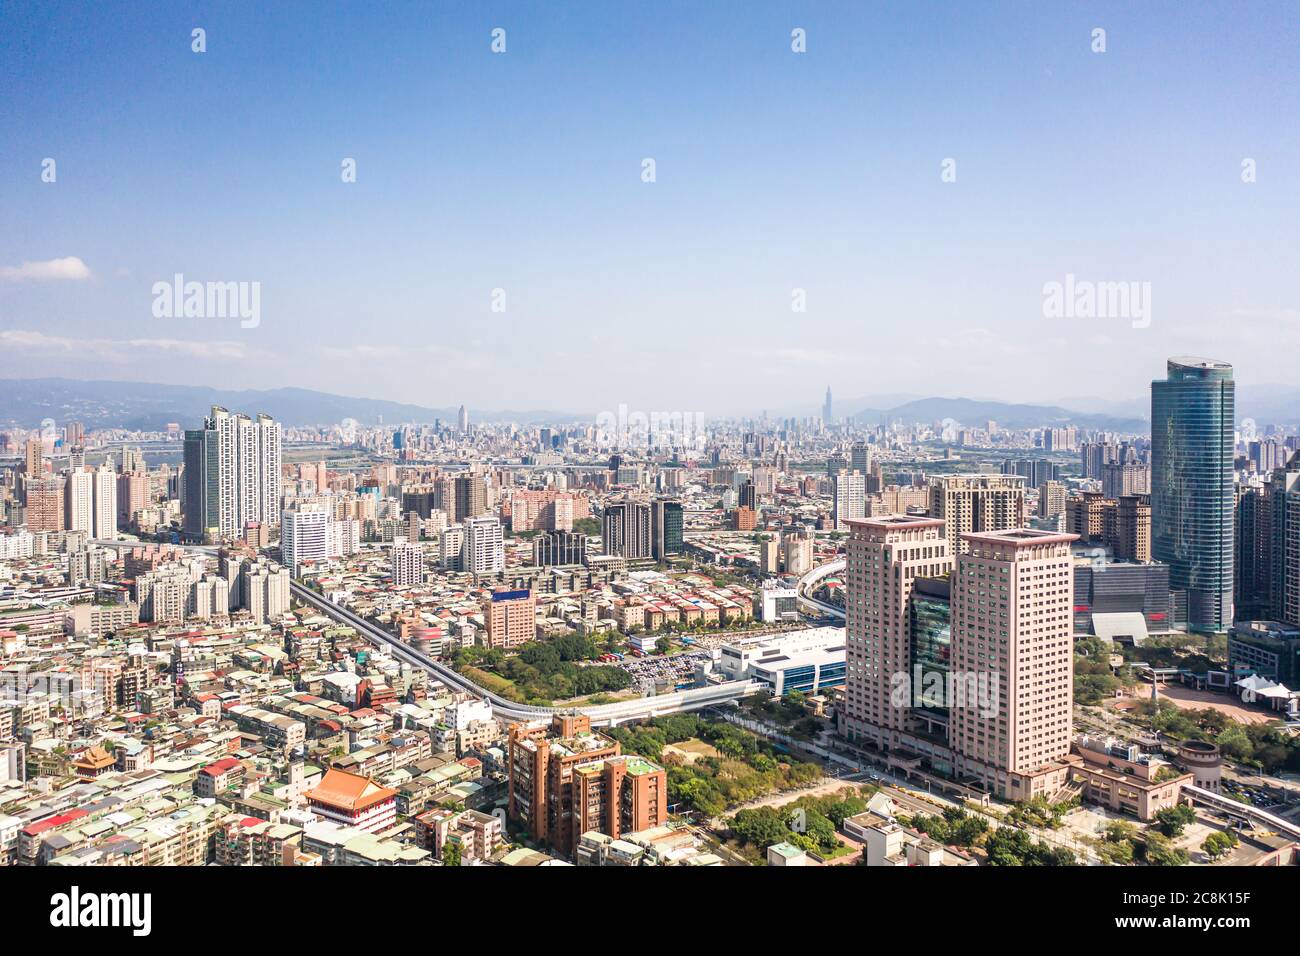 New Taipei City,Taiwan - Feb 1, 2020: This is a view of the Banqiao district in New Taipei where many new buildings can be seen, the building in the c Stock Photo